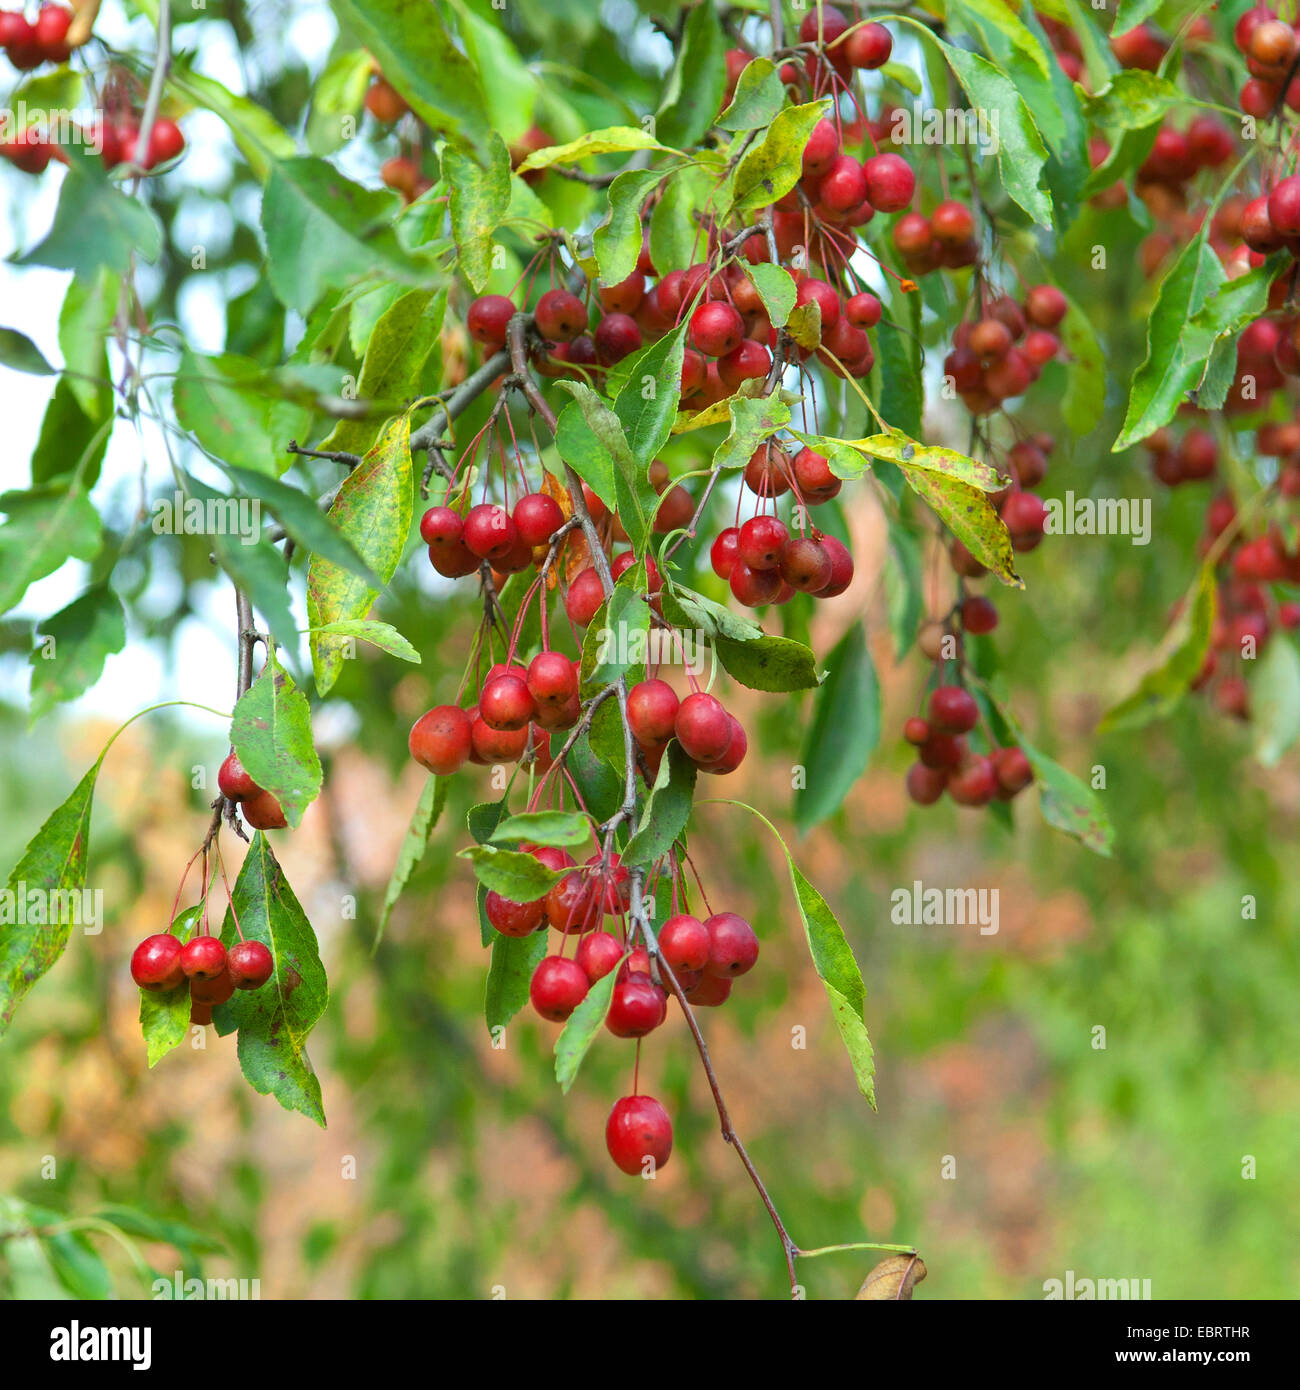 Cutleaf Crabapple (Malus toringoides), branches with fruits, Germany, Saxony Stock Photo